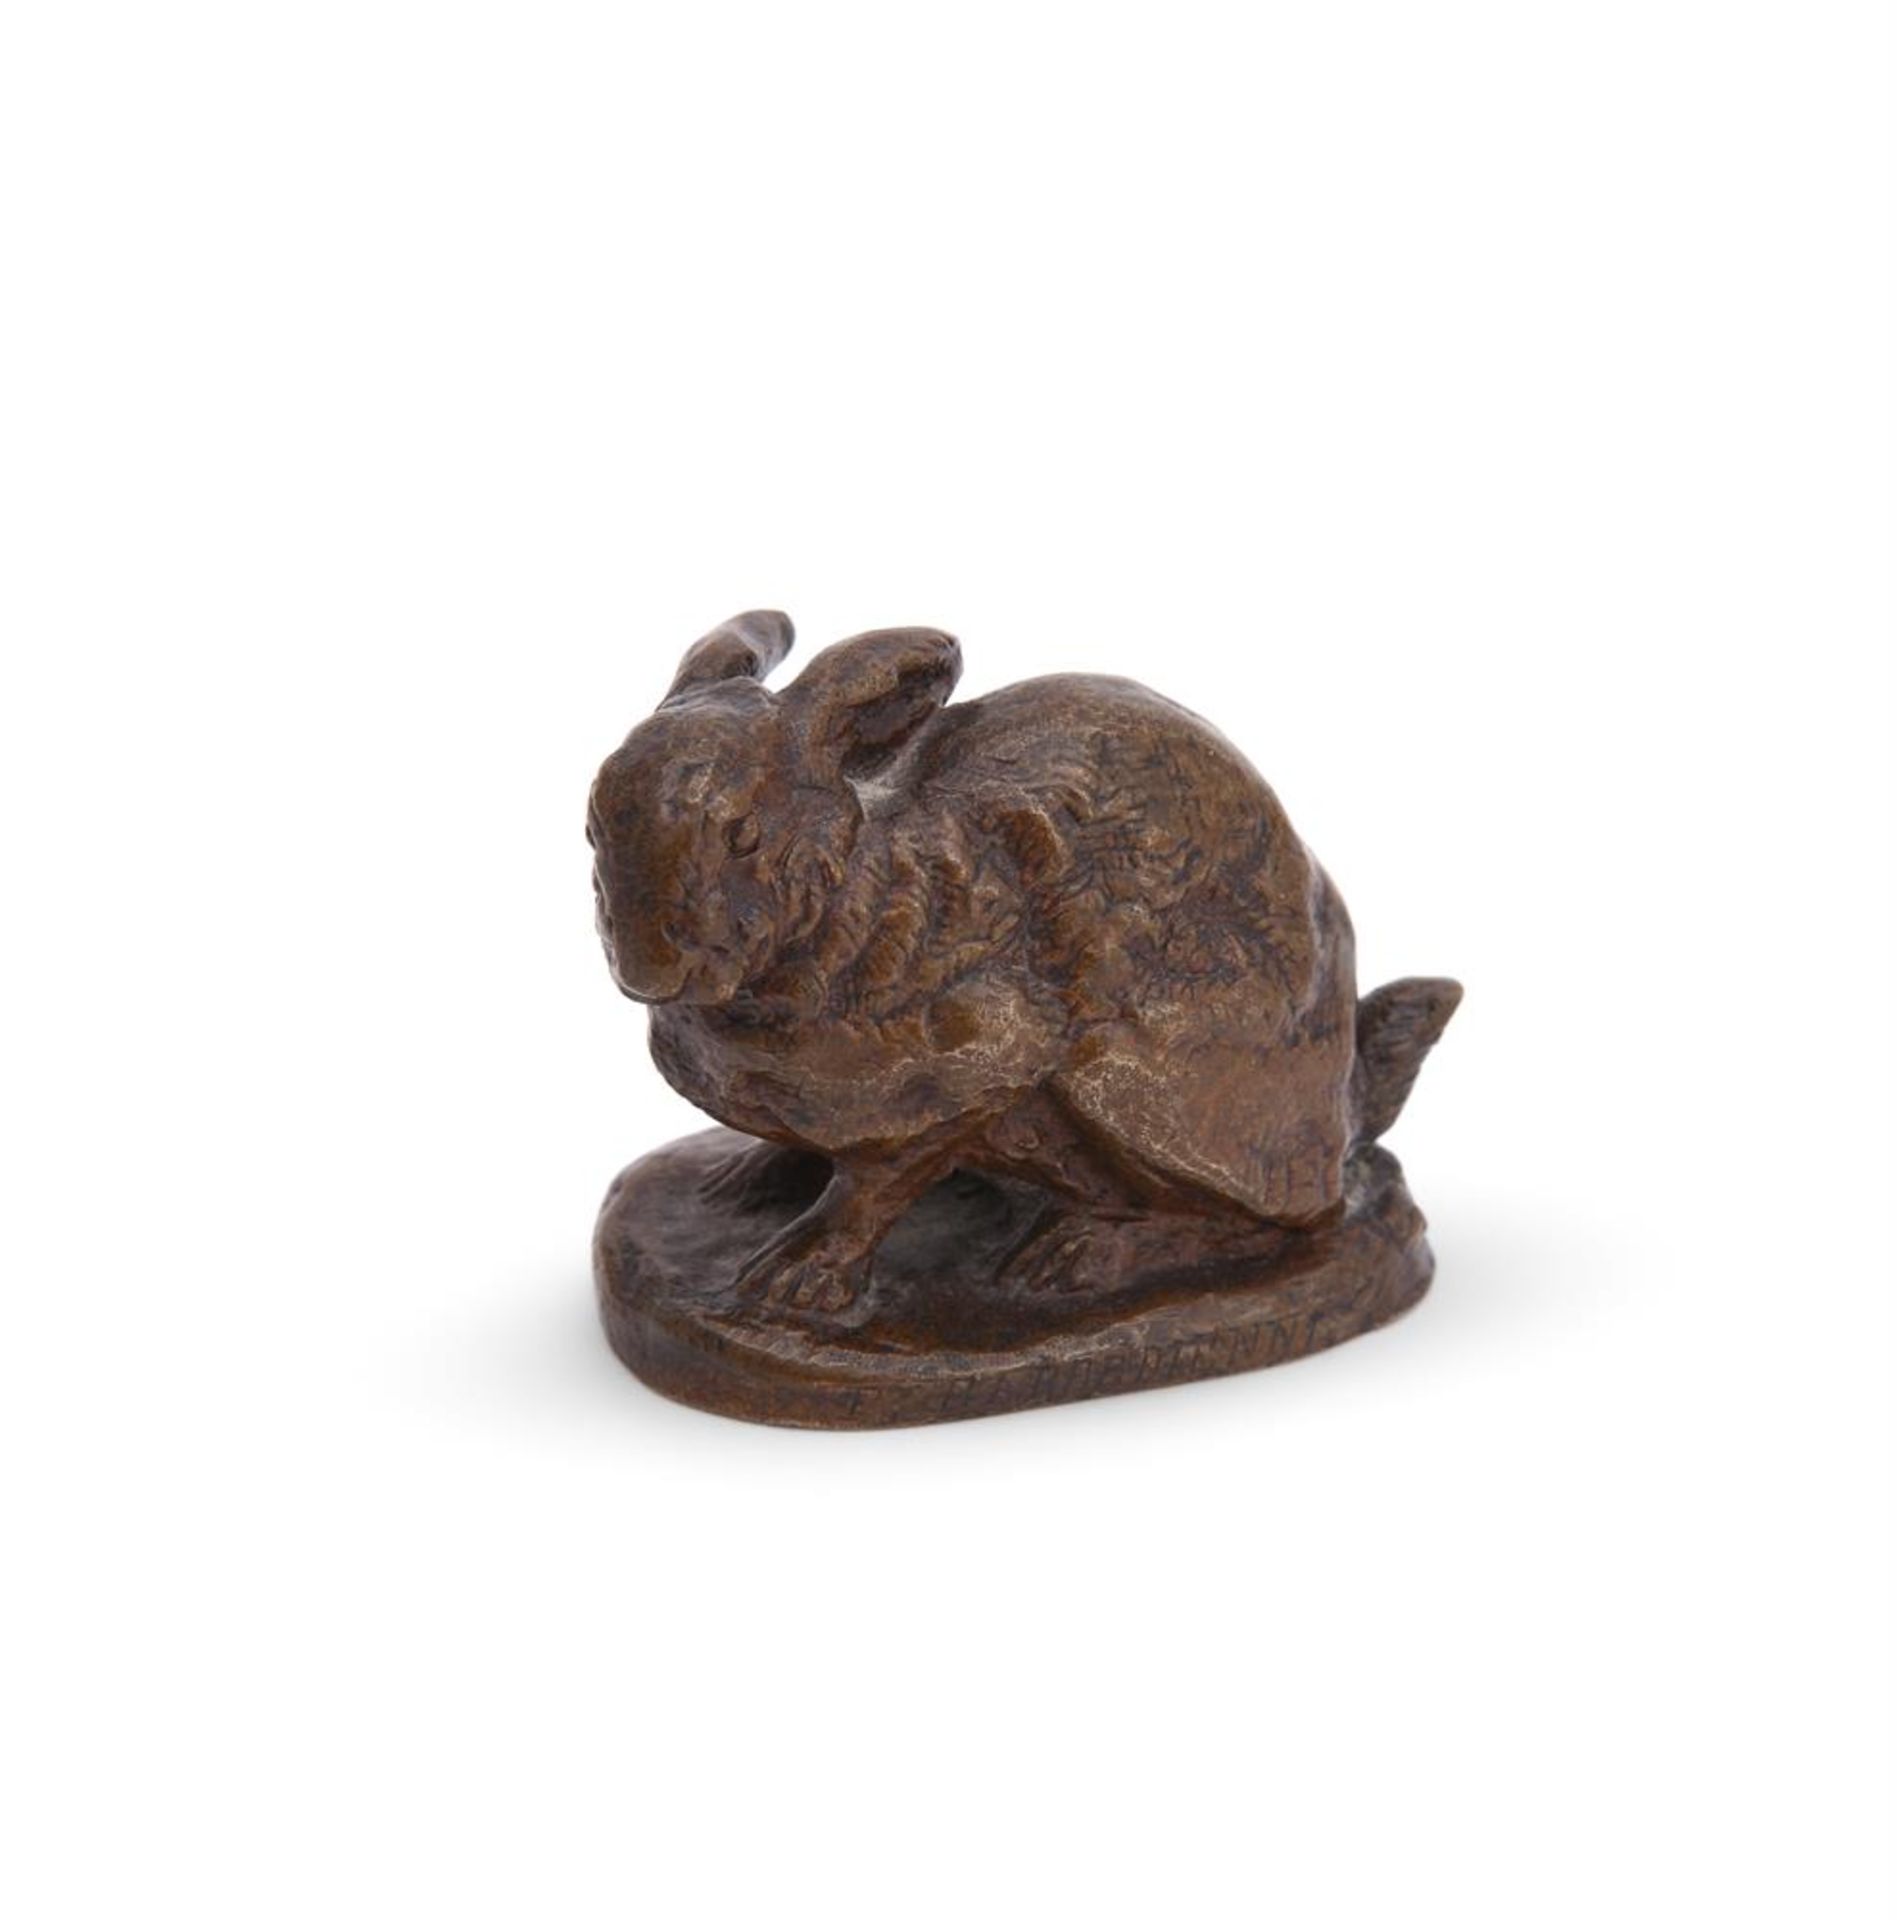 ANTOINE-LOUIS BARYE (FRENCH, 1795-1875), A BRONZE MODEL OF A CROUCHING RABBIT - Image 2 of 6